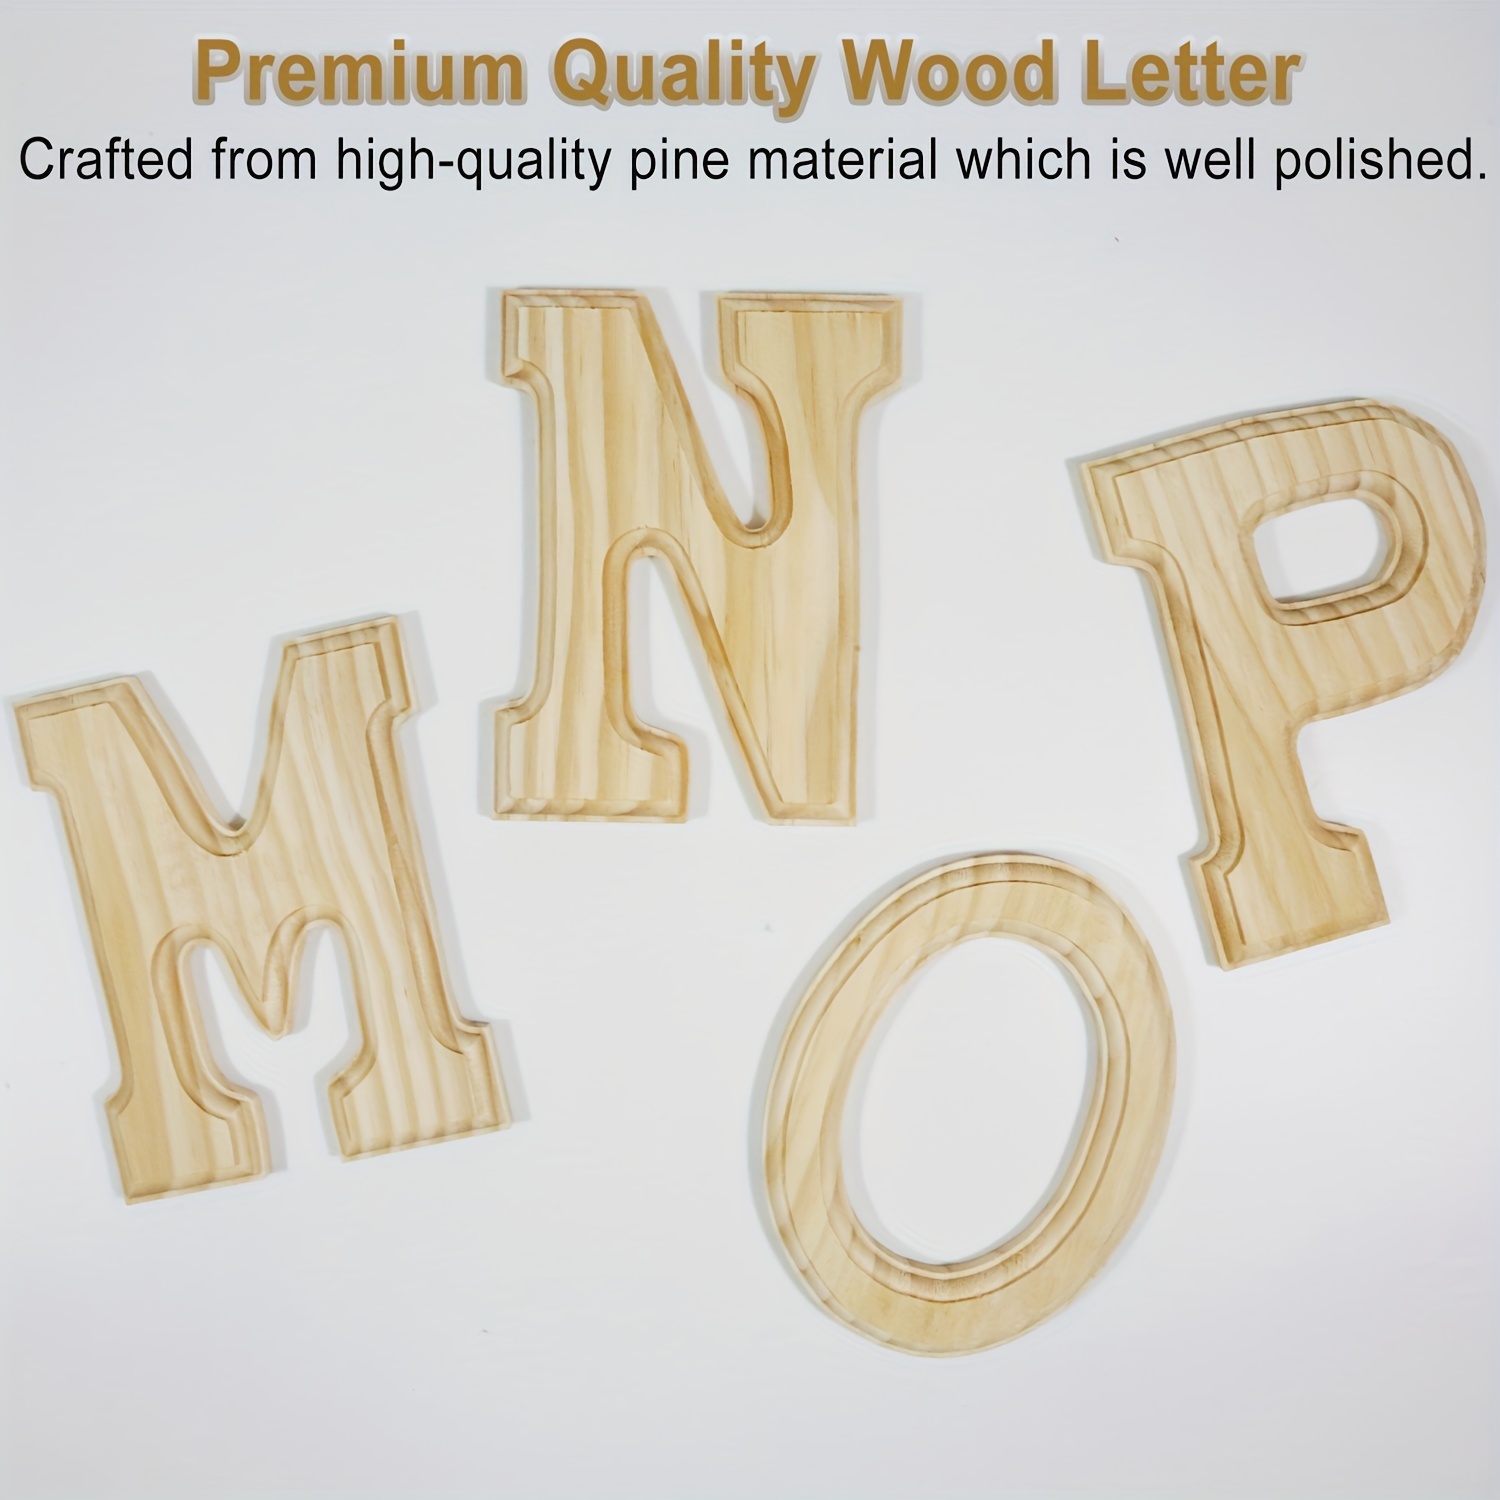  3 Wooden Letters - 78 Pcs Wood Alphabet Letters for Crafts Wood  Letters Sign Decoration Unfinished Wood Letters for Letter Board/Wall  Decor/DIY/Painted/Educational : Toys & Games